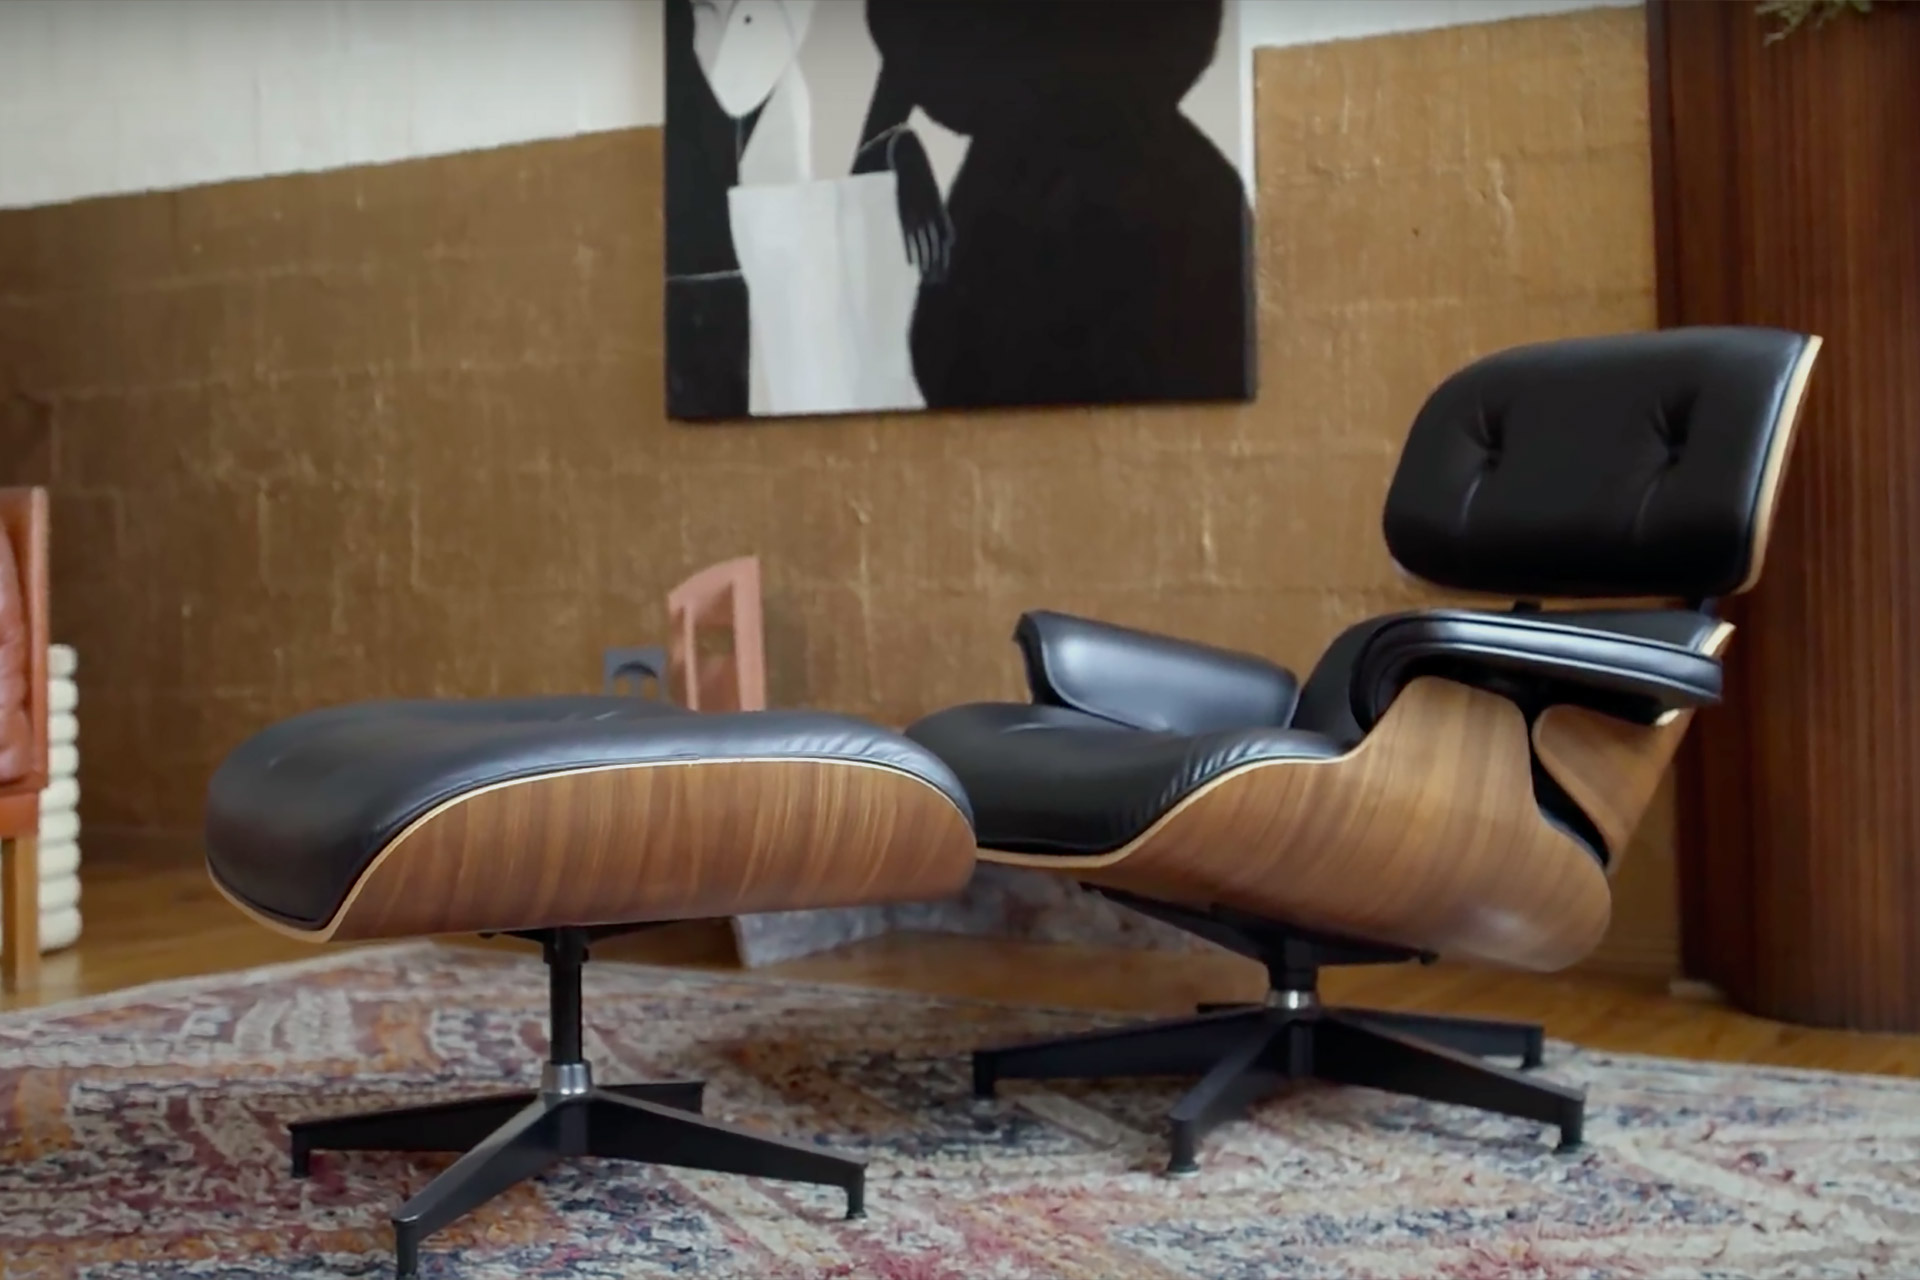 A Love Letter to the Eames Lounge Chair | Uncrate